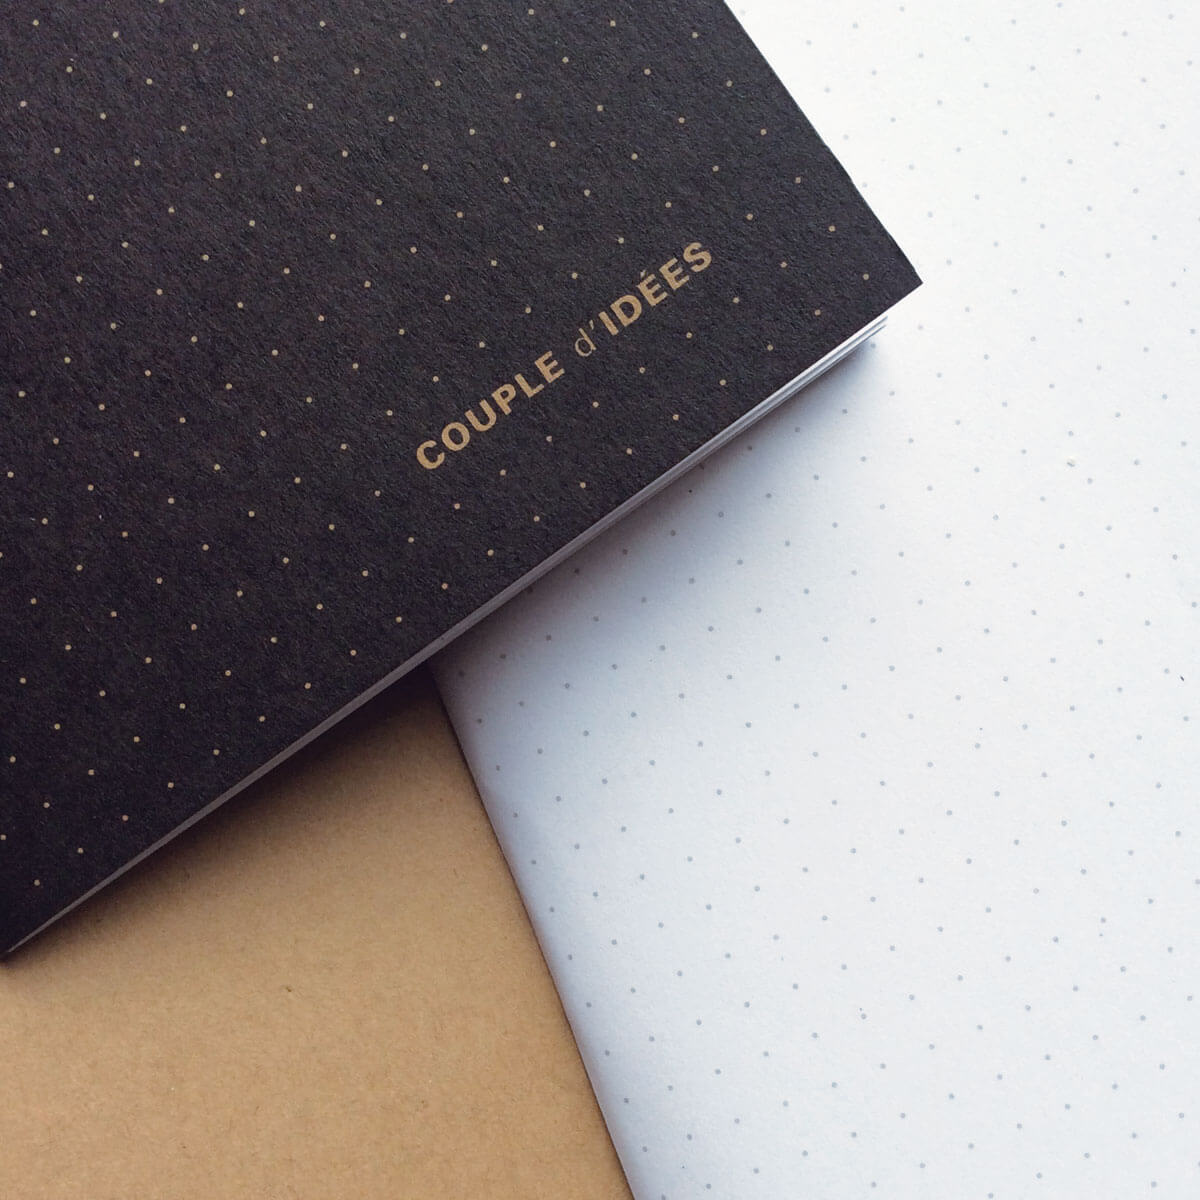 Couple d'idees Large WORKSHOP notebook